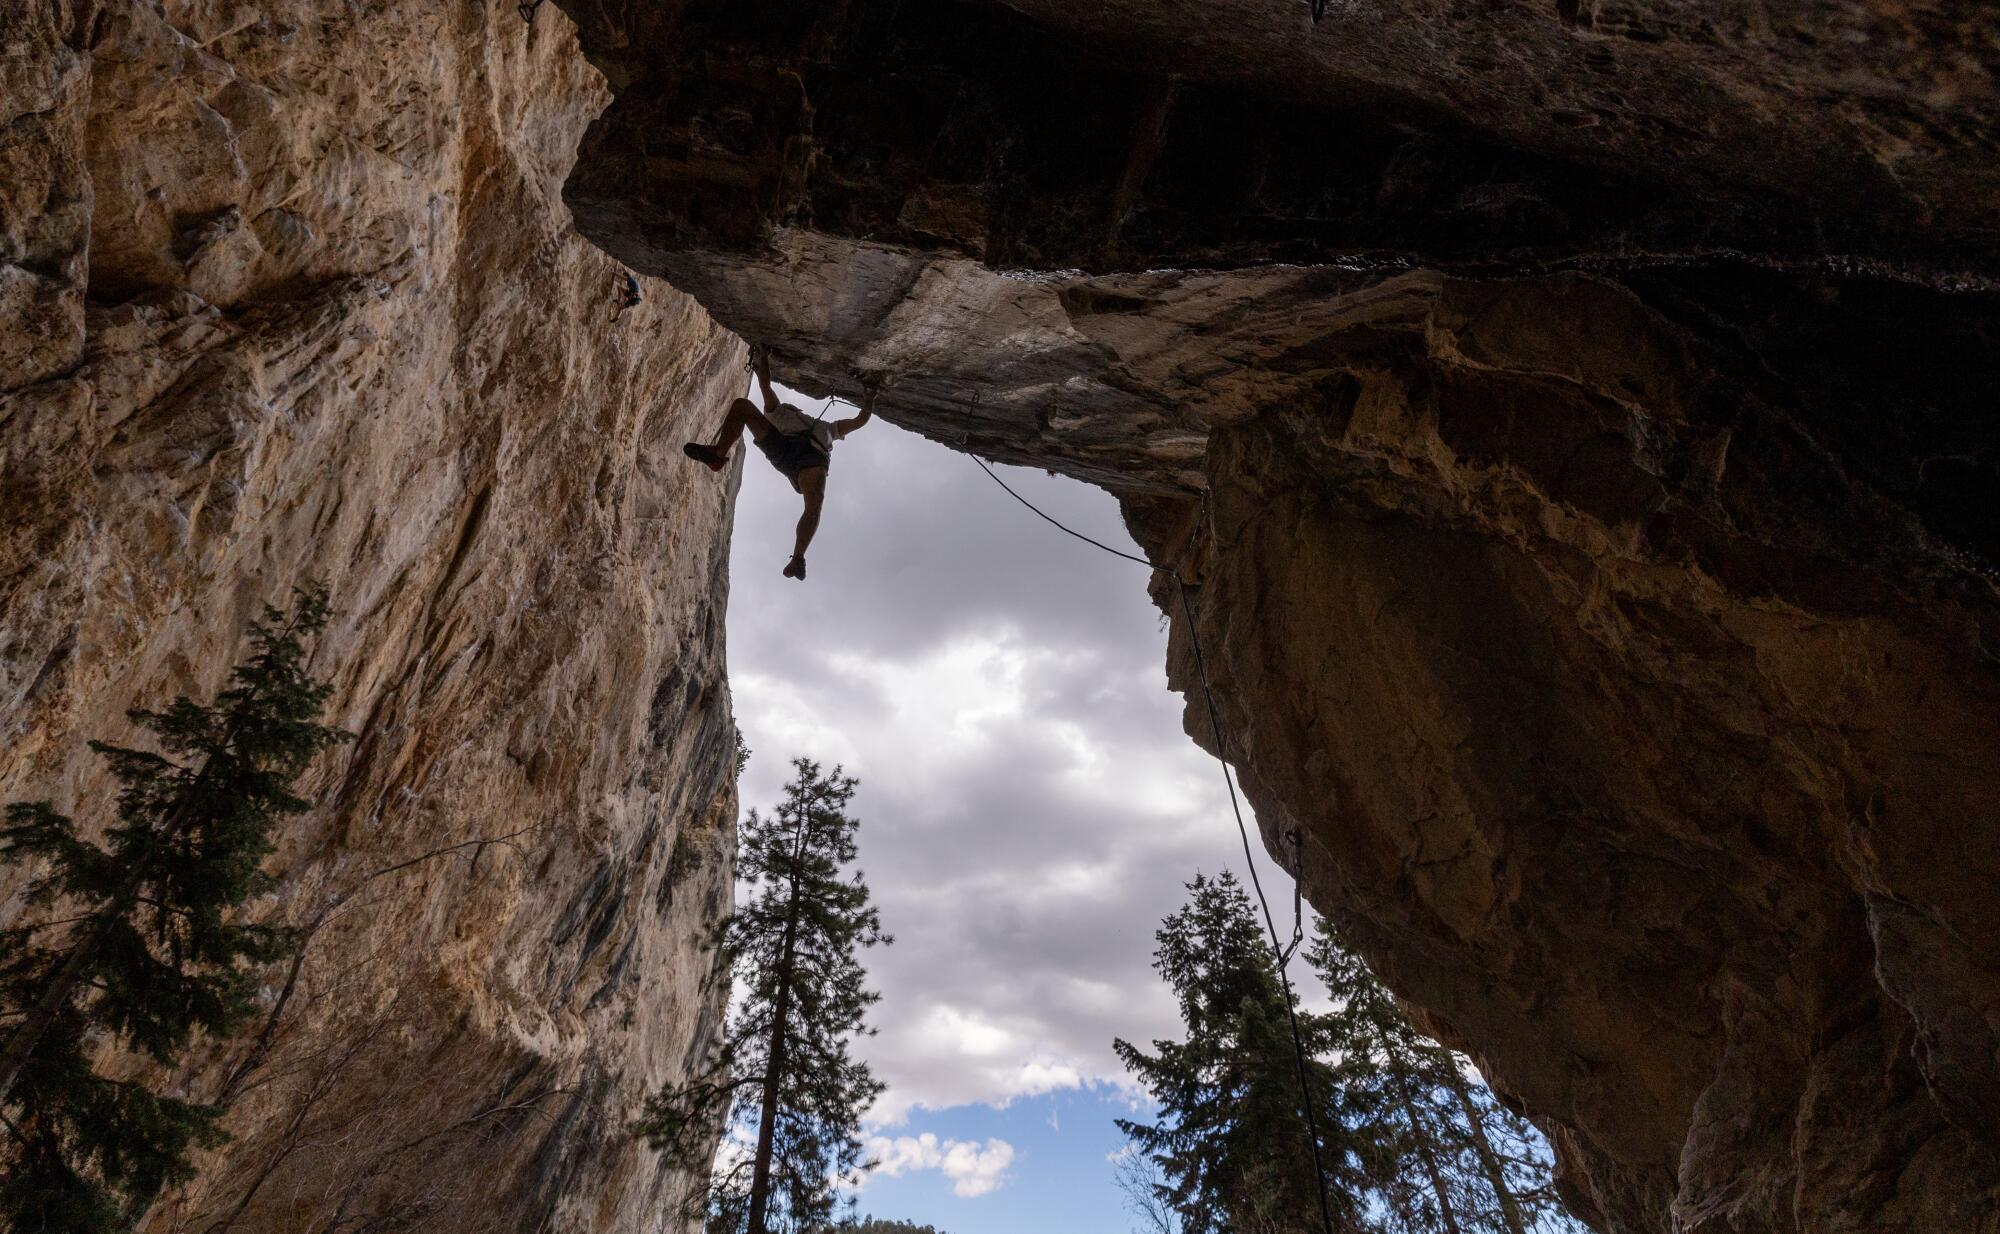  A climber hangs high off the ground from a horizontal shelf of rock.  